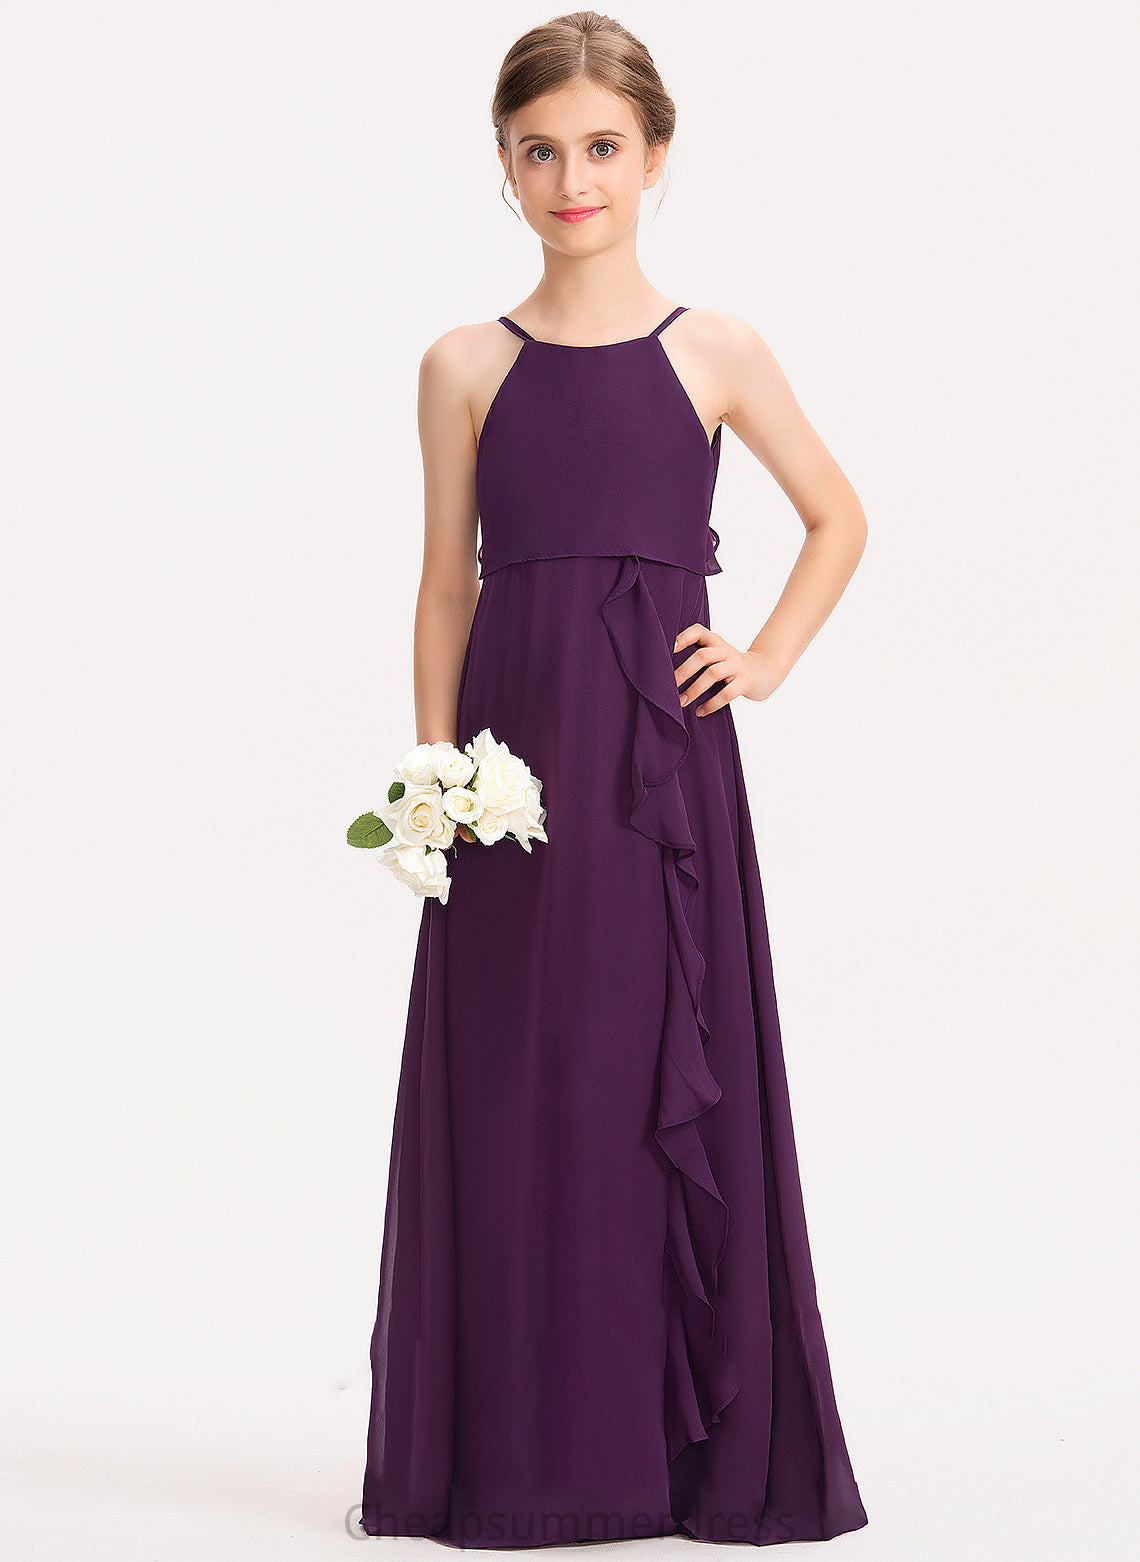 Neck Scoop A-Line Floor-Length Bow(s) Cascading Chiffon Ruffles Junior Bridesmaid Dresses With Keely